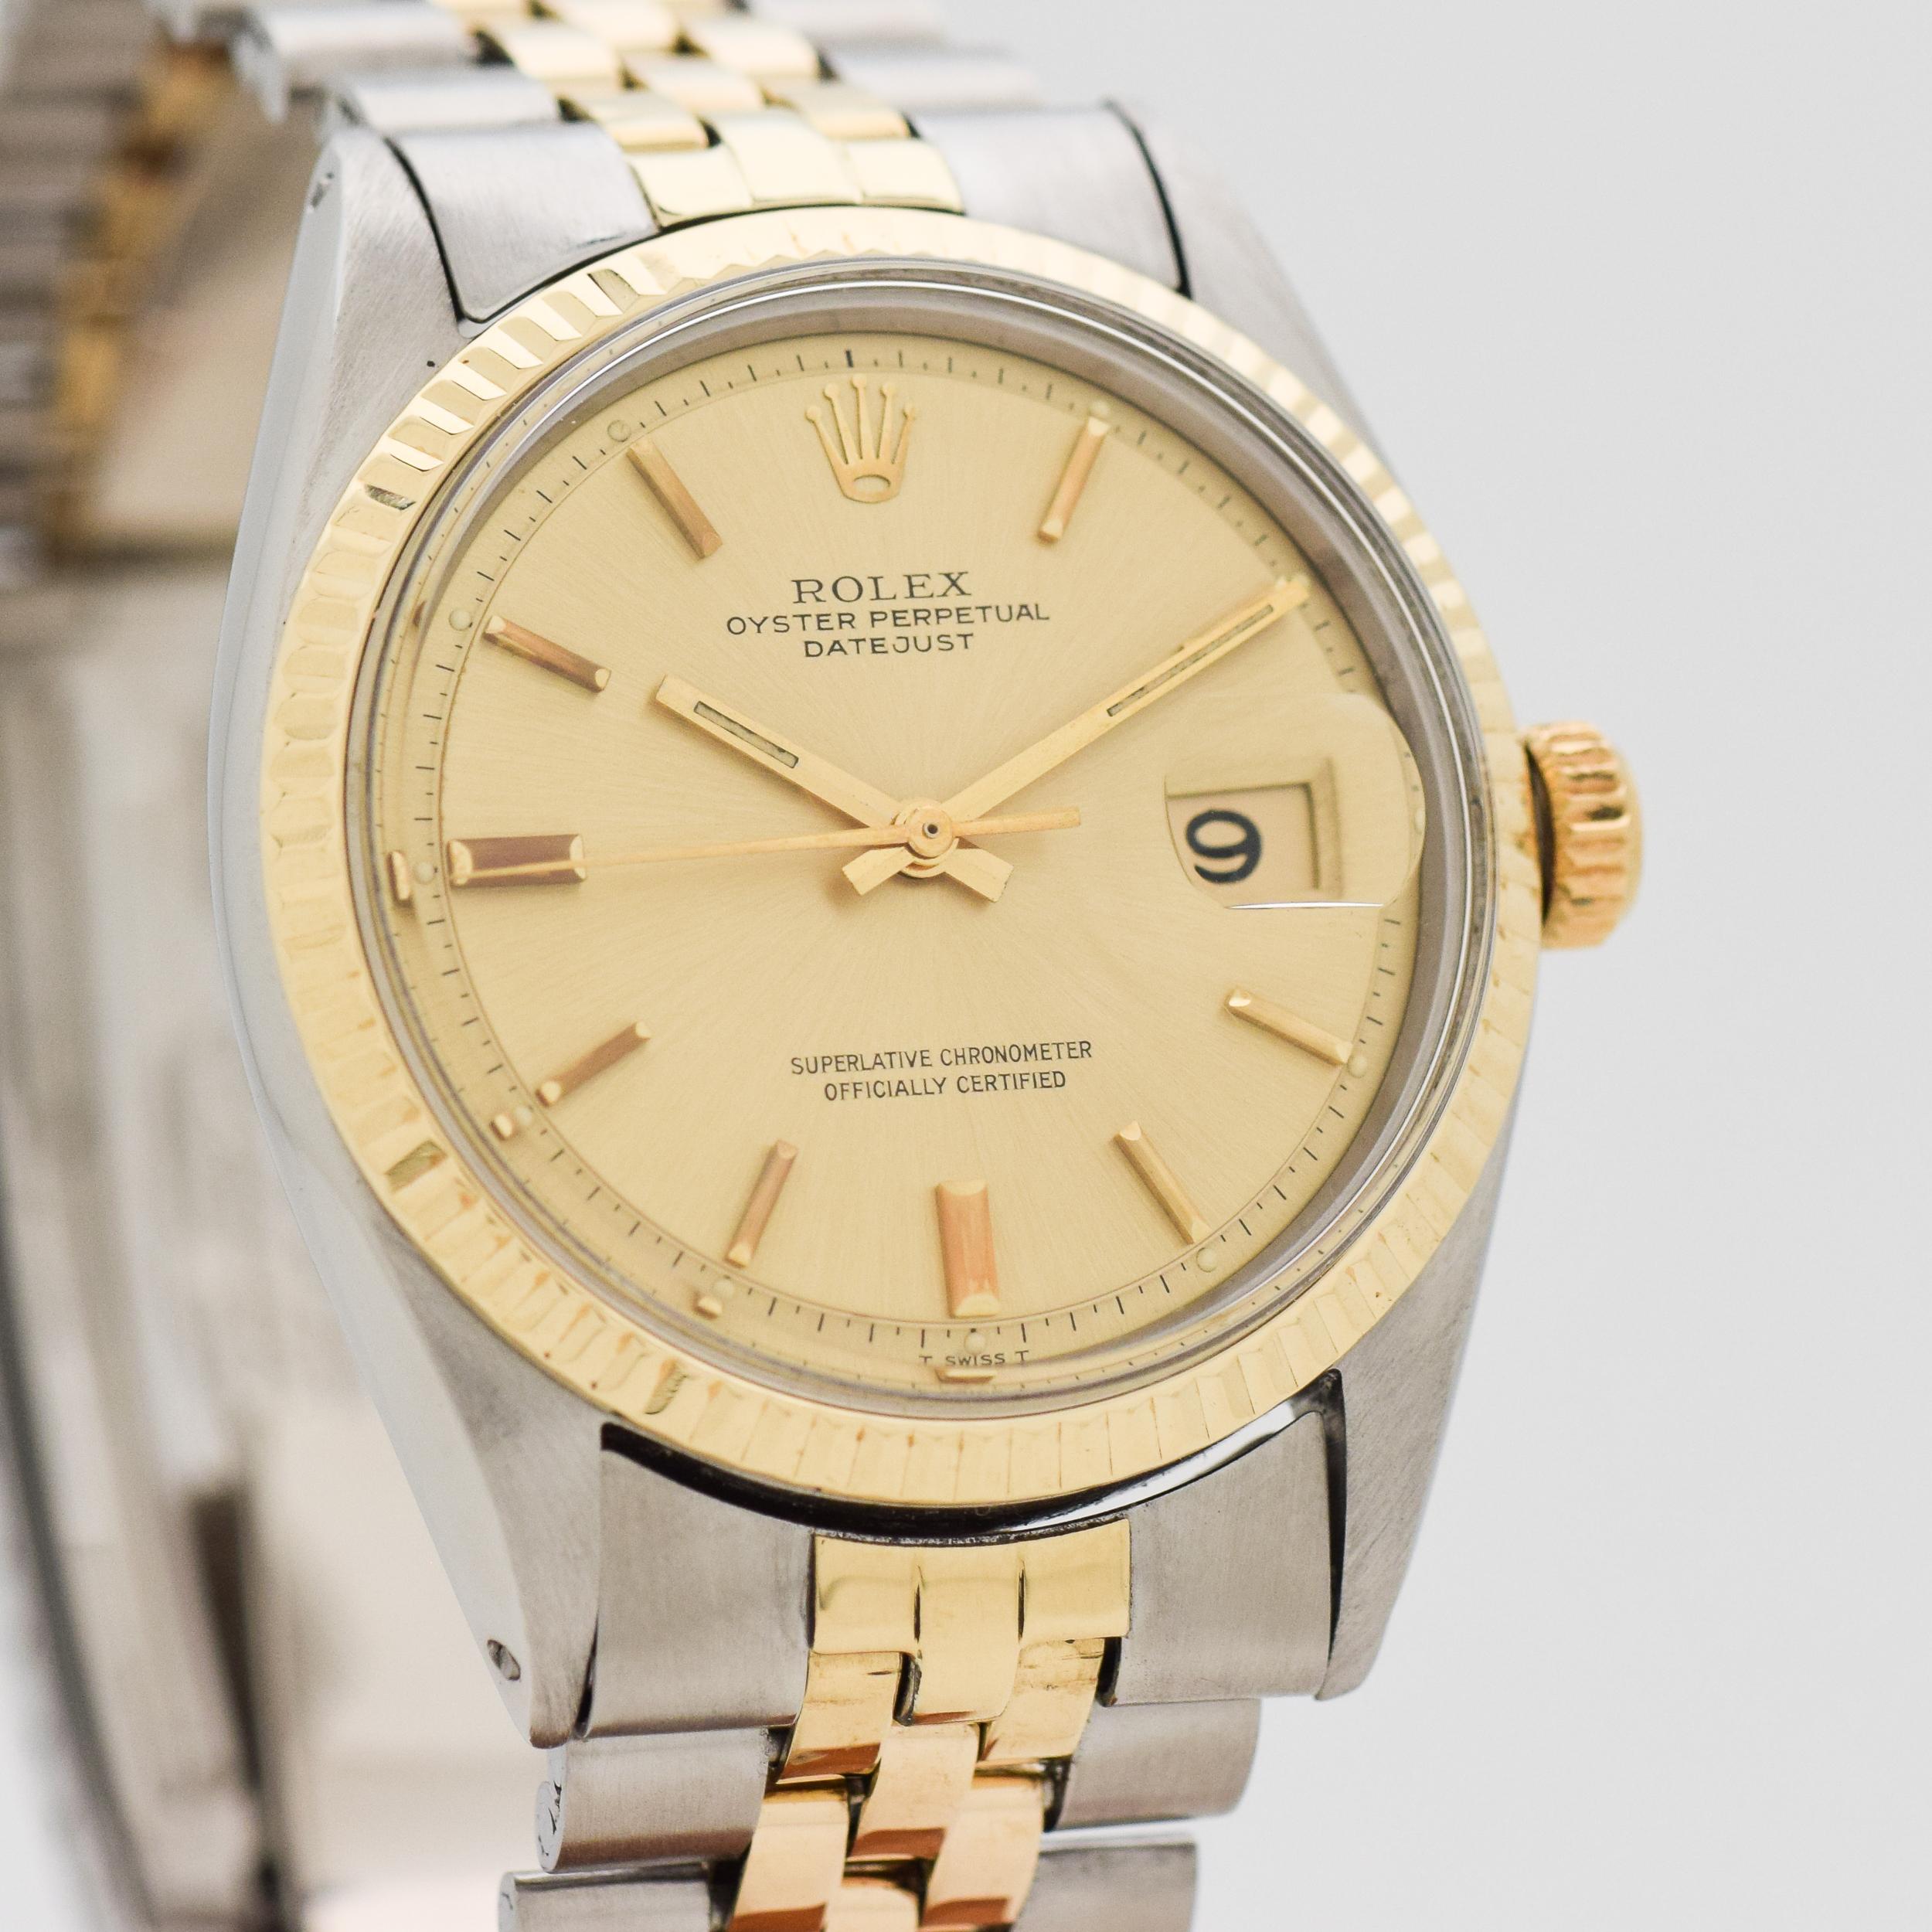 1971 Vintage Rolex Datejust Ref. 1601 Two Tone 14k Yellow Gold and Stainless Steel watch with Original Champagne Dial with Applied Gold Color Rounded Stick/Bar/Baton Markers with Original Rolex Two Tone 14k Yellow Gold and Stainless Steel Jubilee